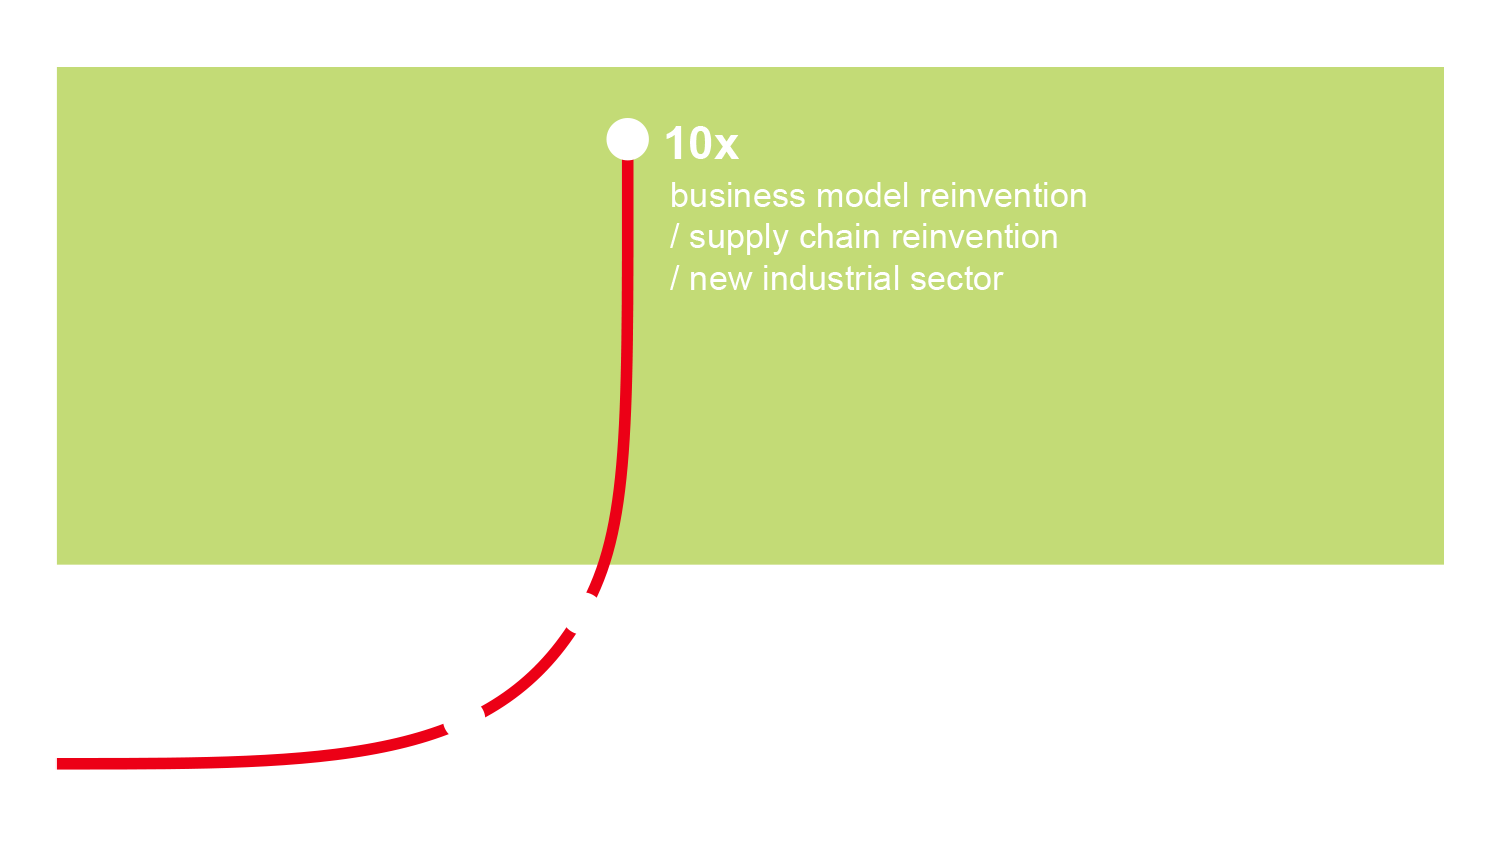 Figure 2: The exponential efficiency of reaching for the 10X result: 10X result does not require 10X effort. Meanwhile, the gray and green zones represent a paradigm shift: the 10X results, very likely, mean a shift in historical models - in which the product/service and process will not stay the same.